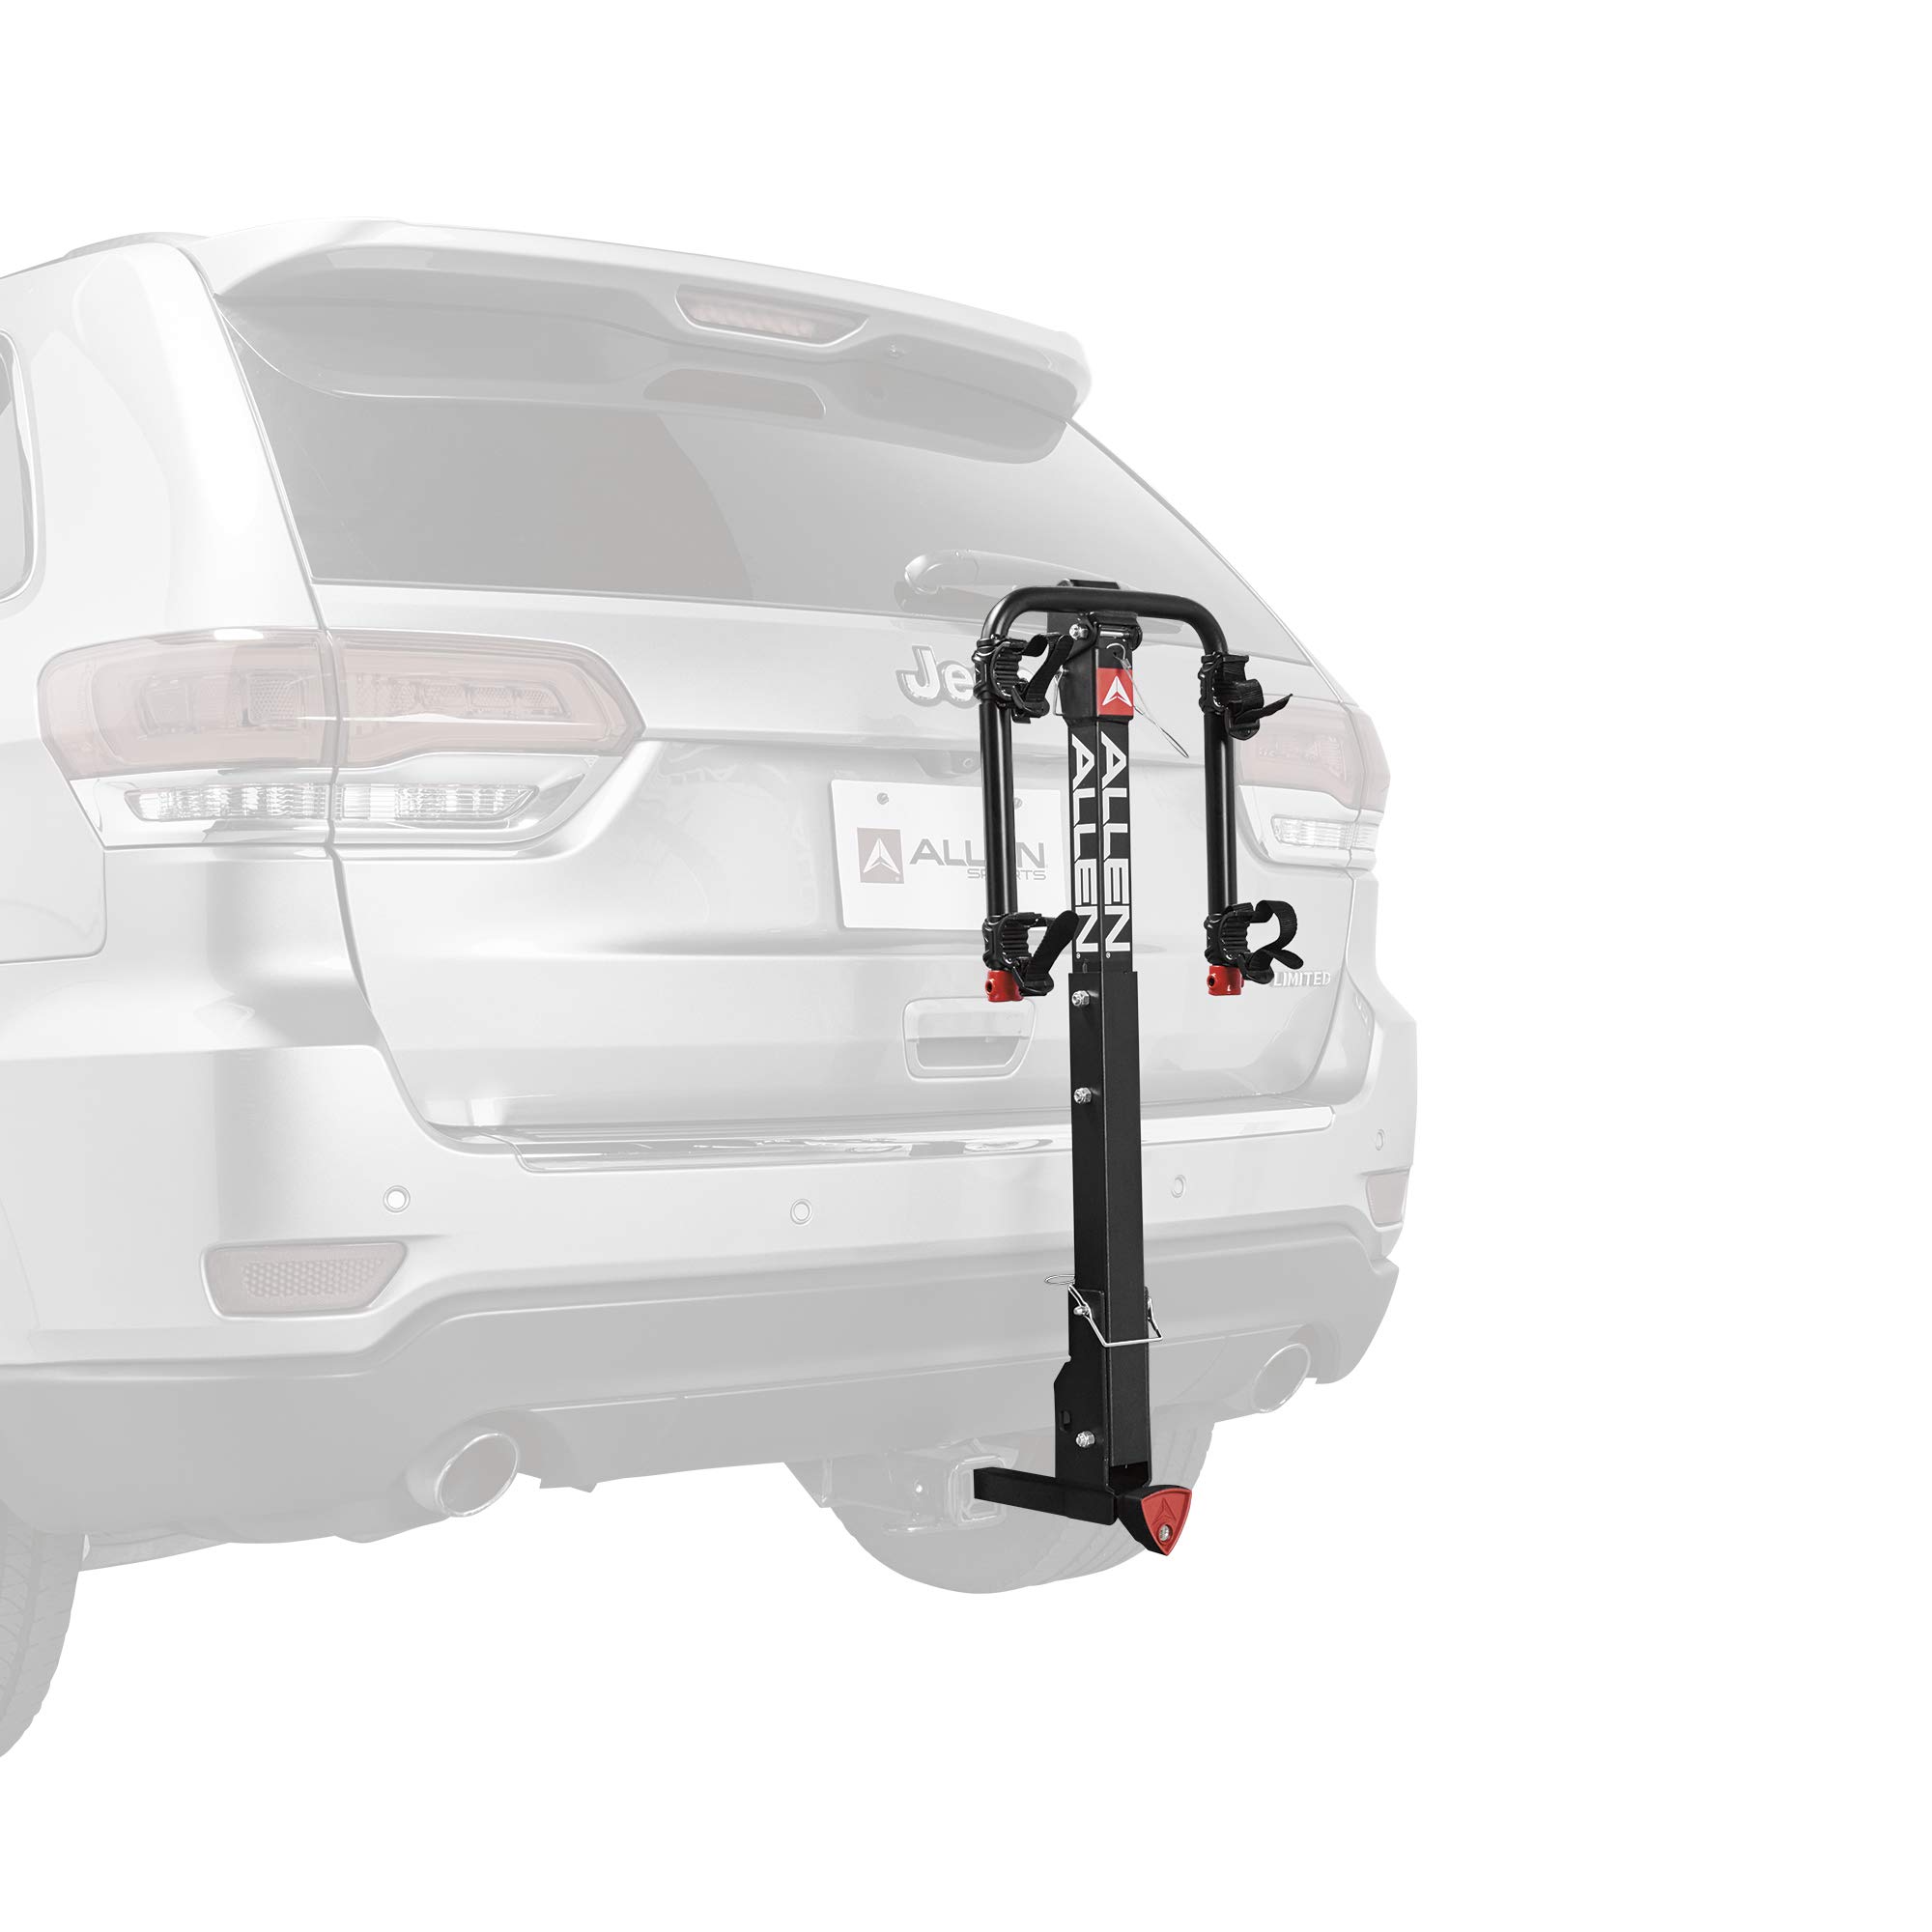 Allen Sports Deluxe Locking Quick Release 2-Bike Carrier for 2 Inch & 1 4 in. Hitch, Model 522QR , Black